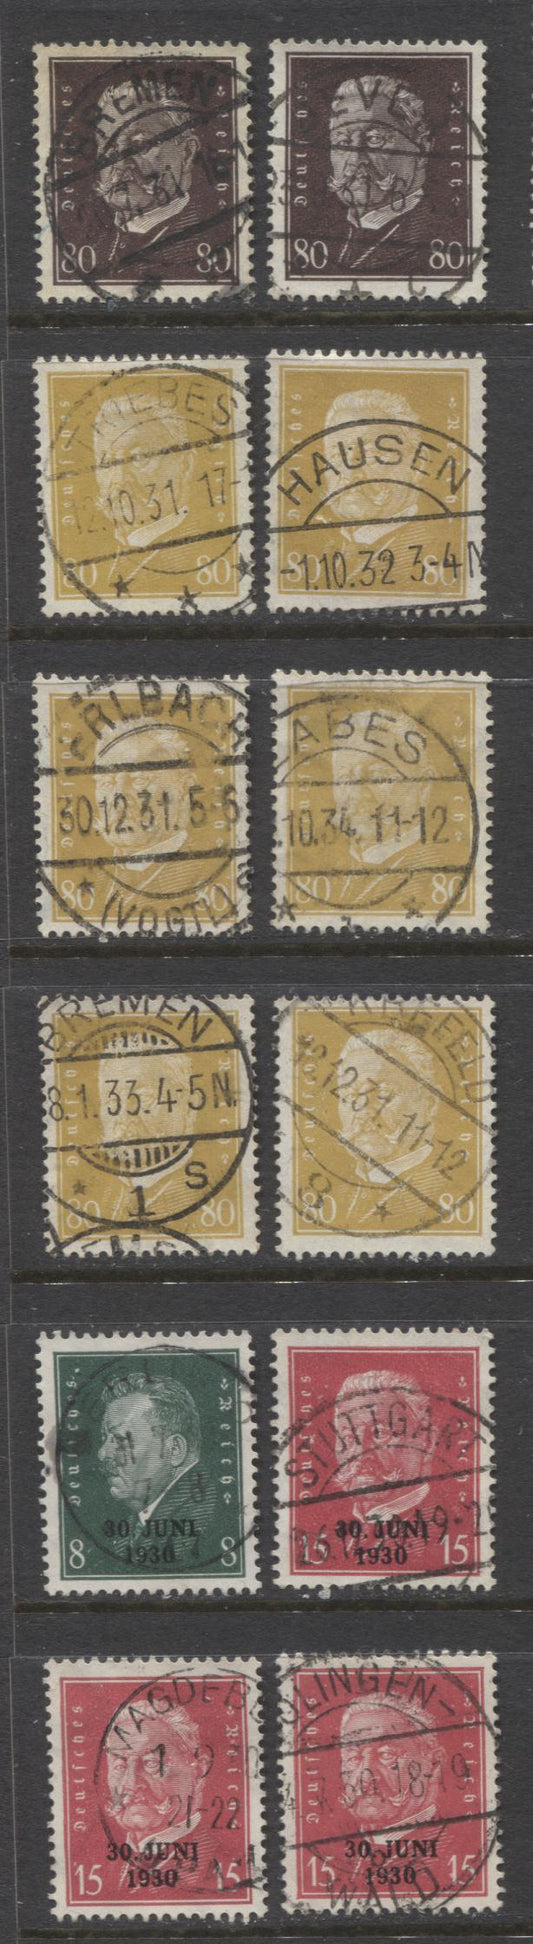 Lot 446 Germany SC#383-386 1928-1932 Ebert & Hindenburg Definitives & Rhineland Evacuation Issues, All With SON Town Cancels, 12 VF Used Singles, Click on Listing to See ALL Pictures, 2022 Scott Classic Cat. $30.6